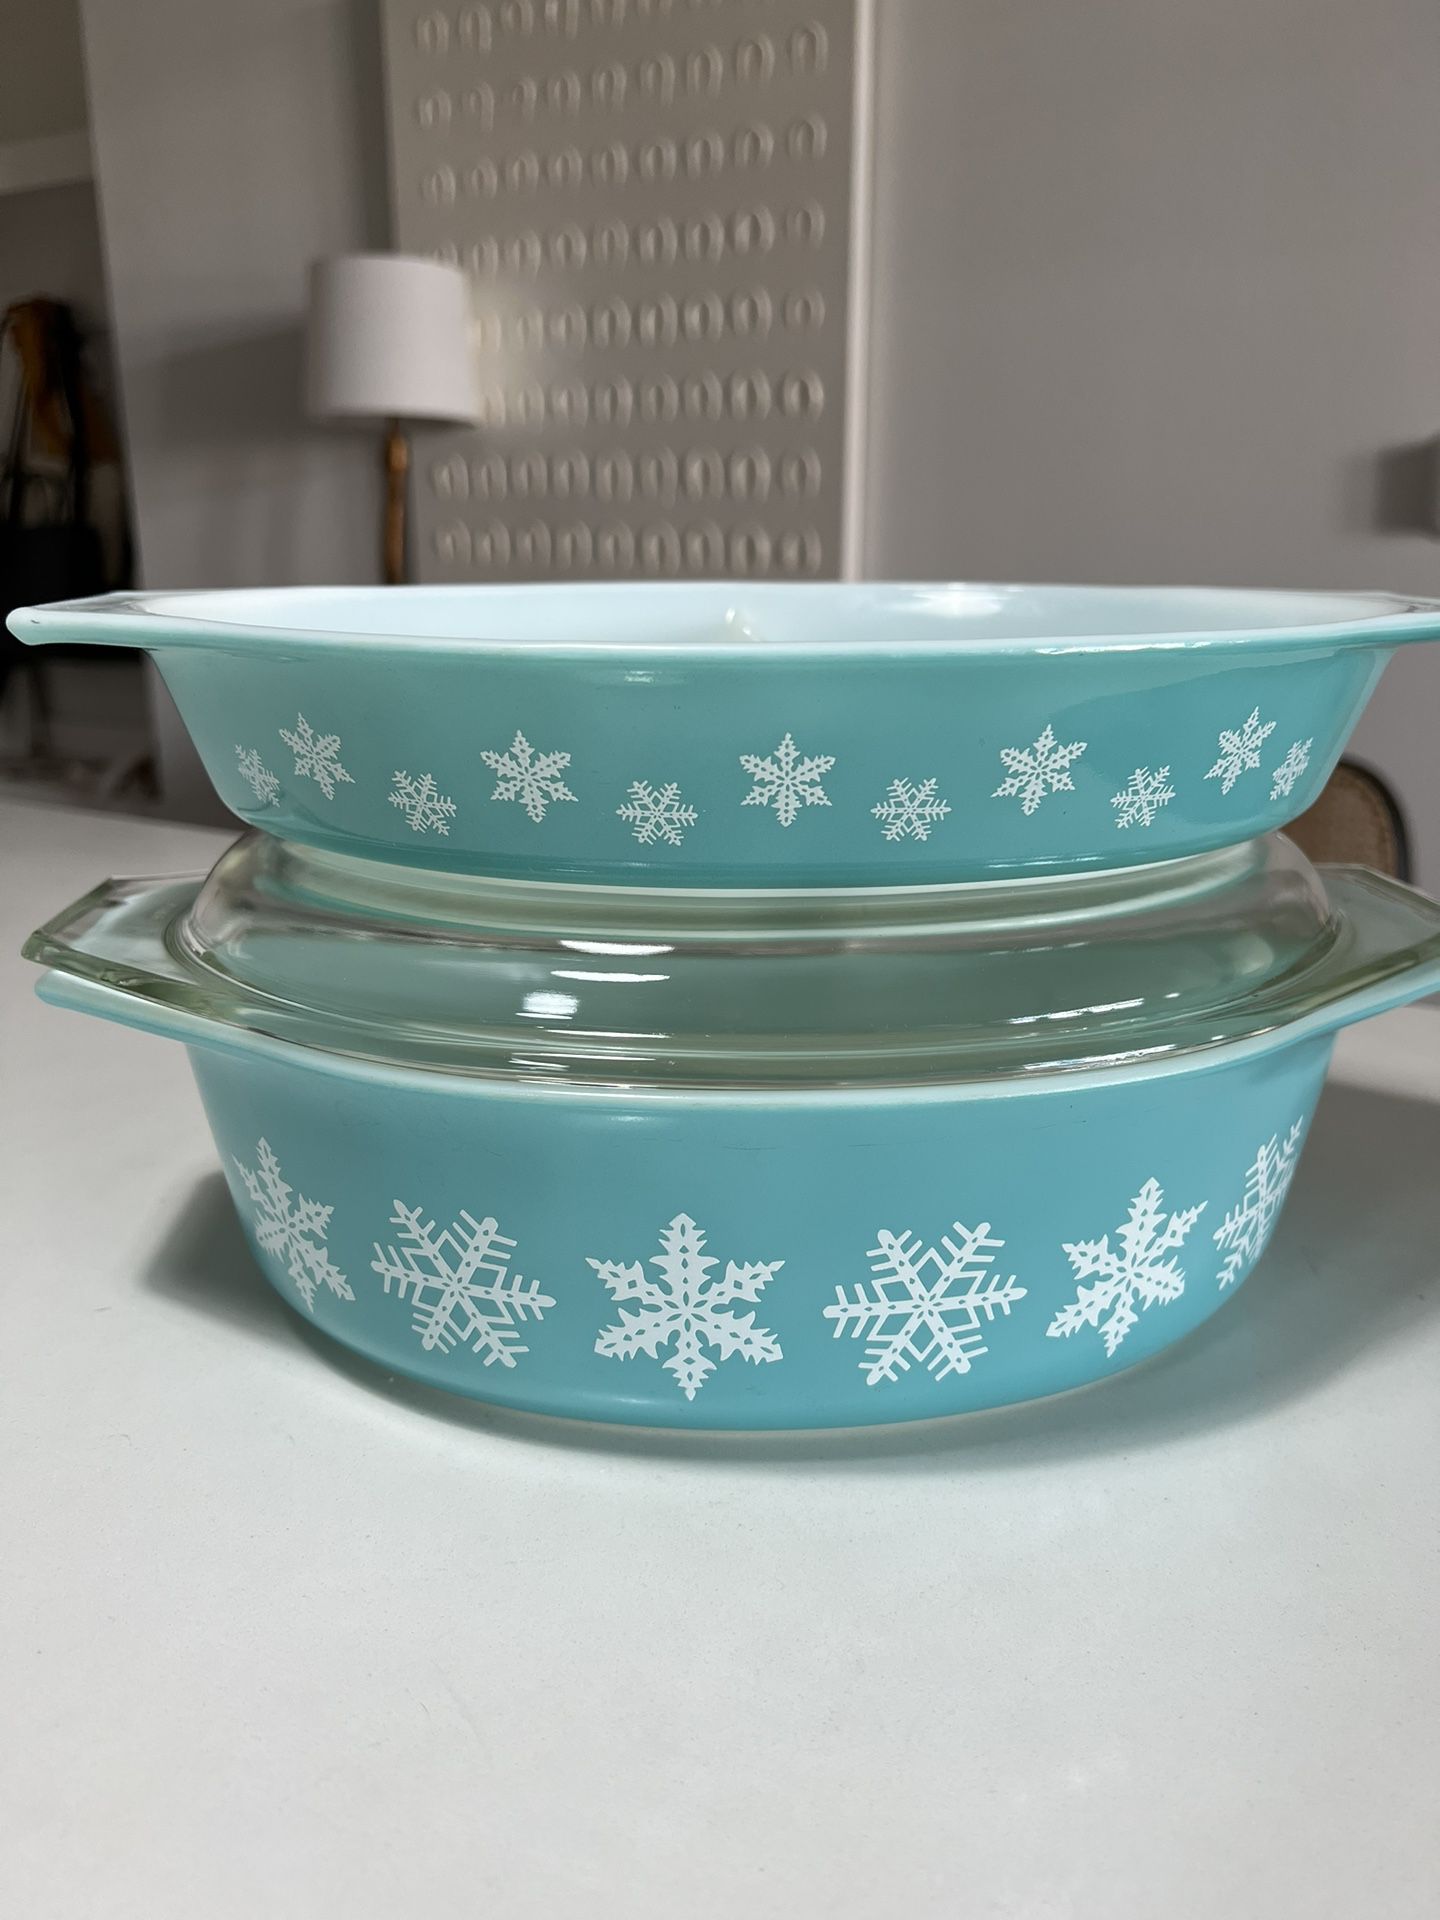 2 Vintage Pyrex Casserole Dishes - Blue Snowflake Collection 